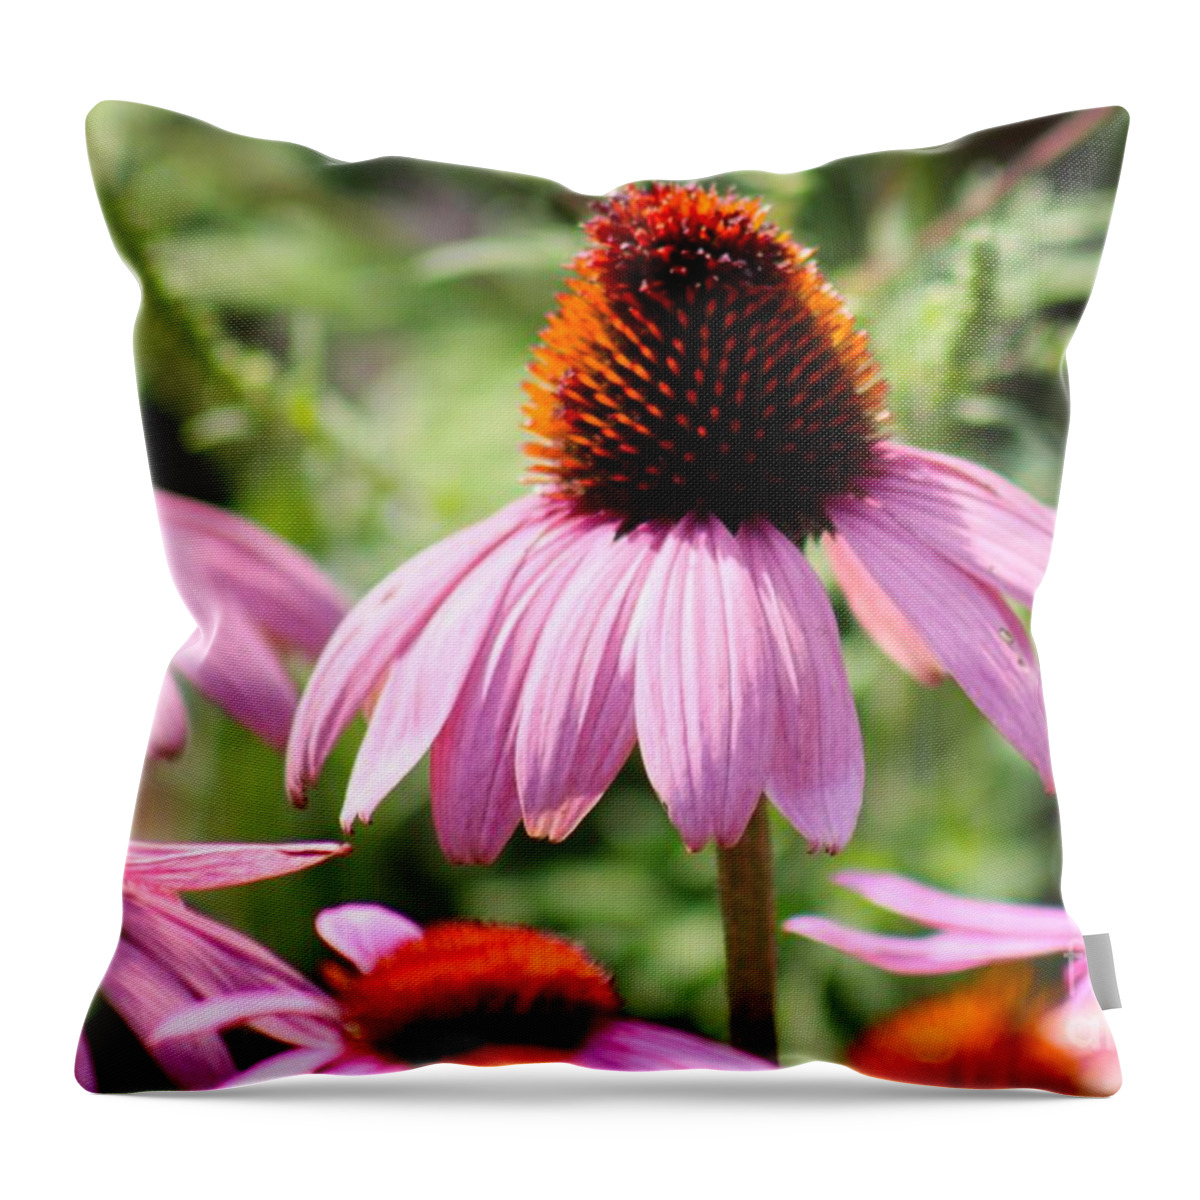 Pink Throw Pillow featuring the photograph Nature's Beauty 98 by Deena Withycombe